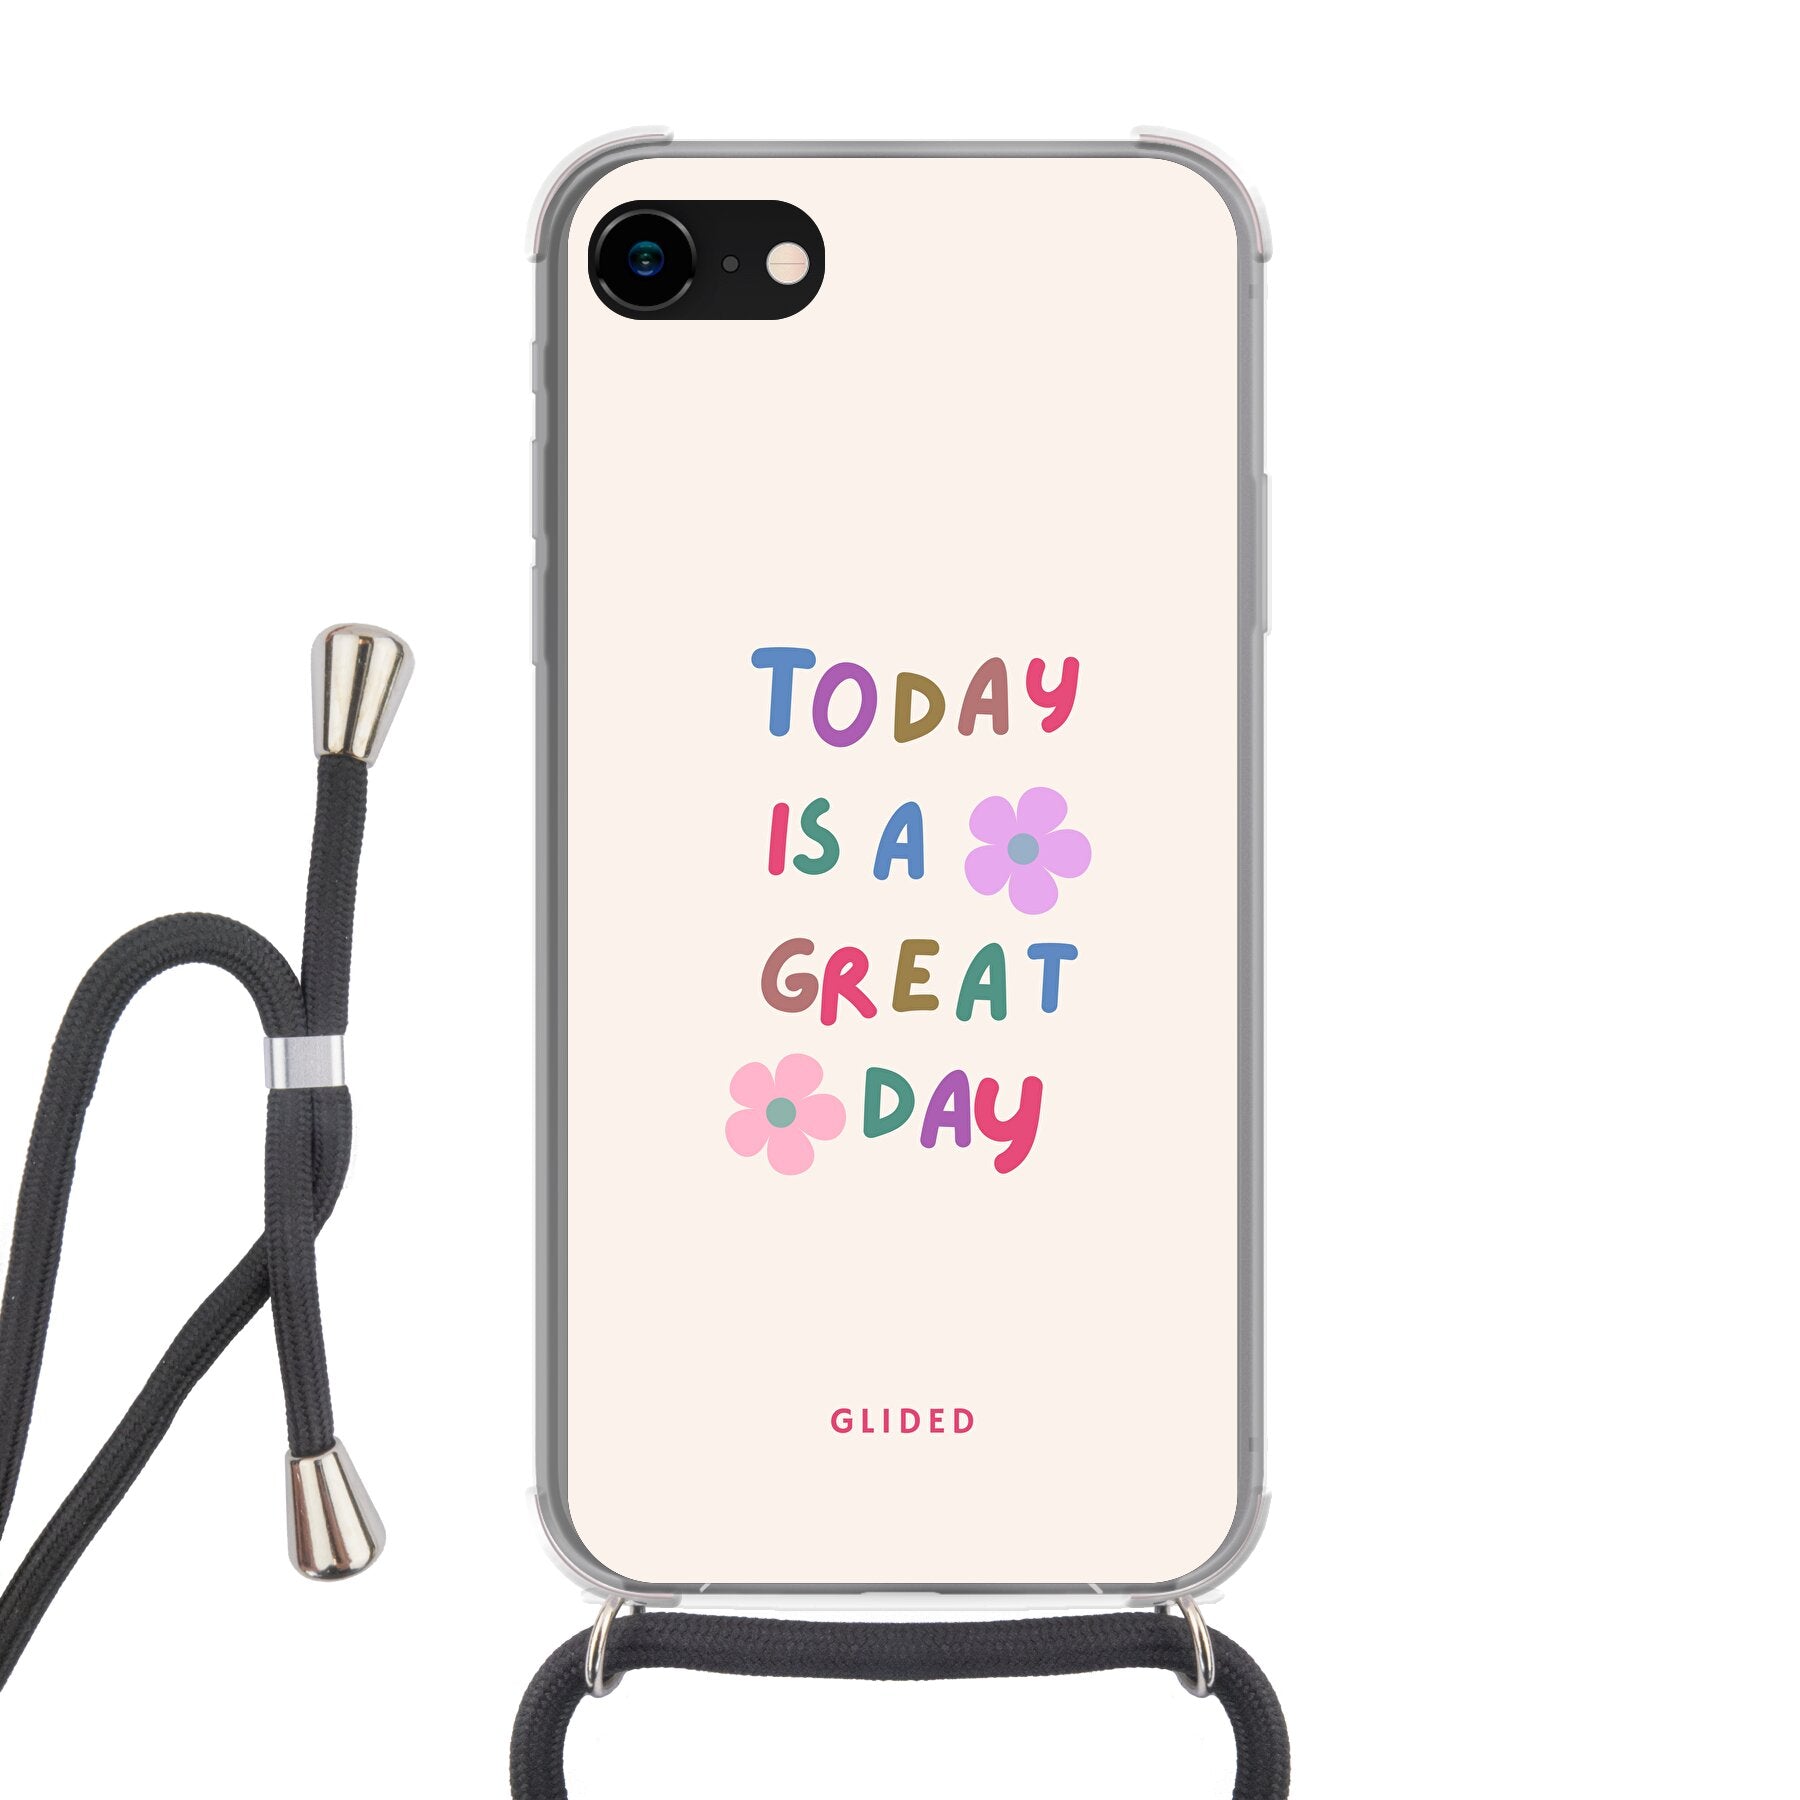 Great Day - iPhone 7 Handyhülle Crossbody case mit Band